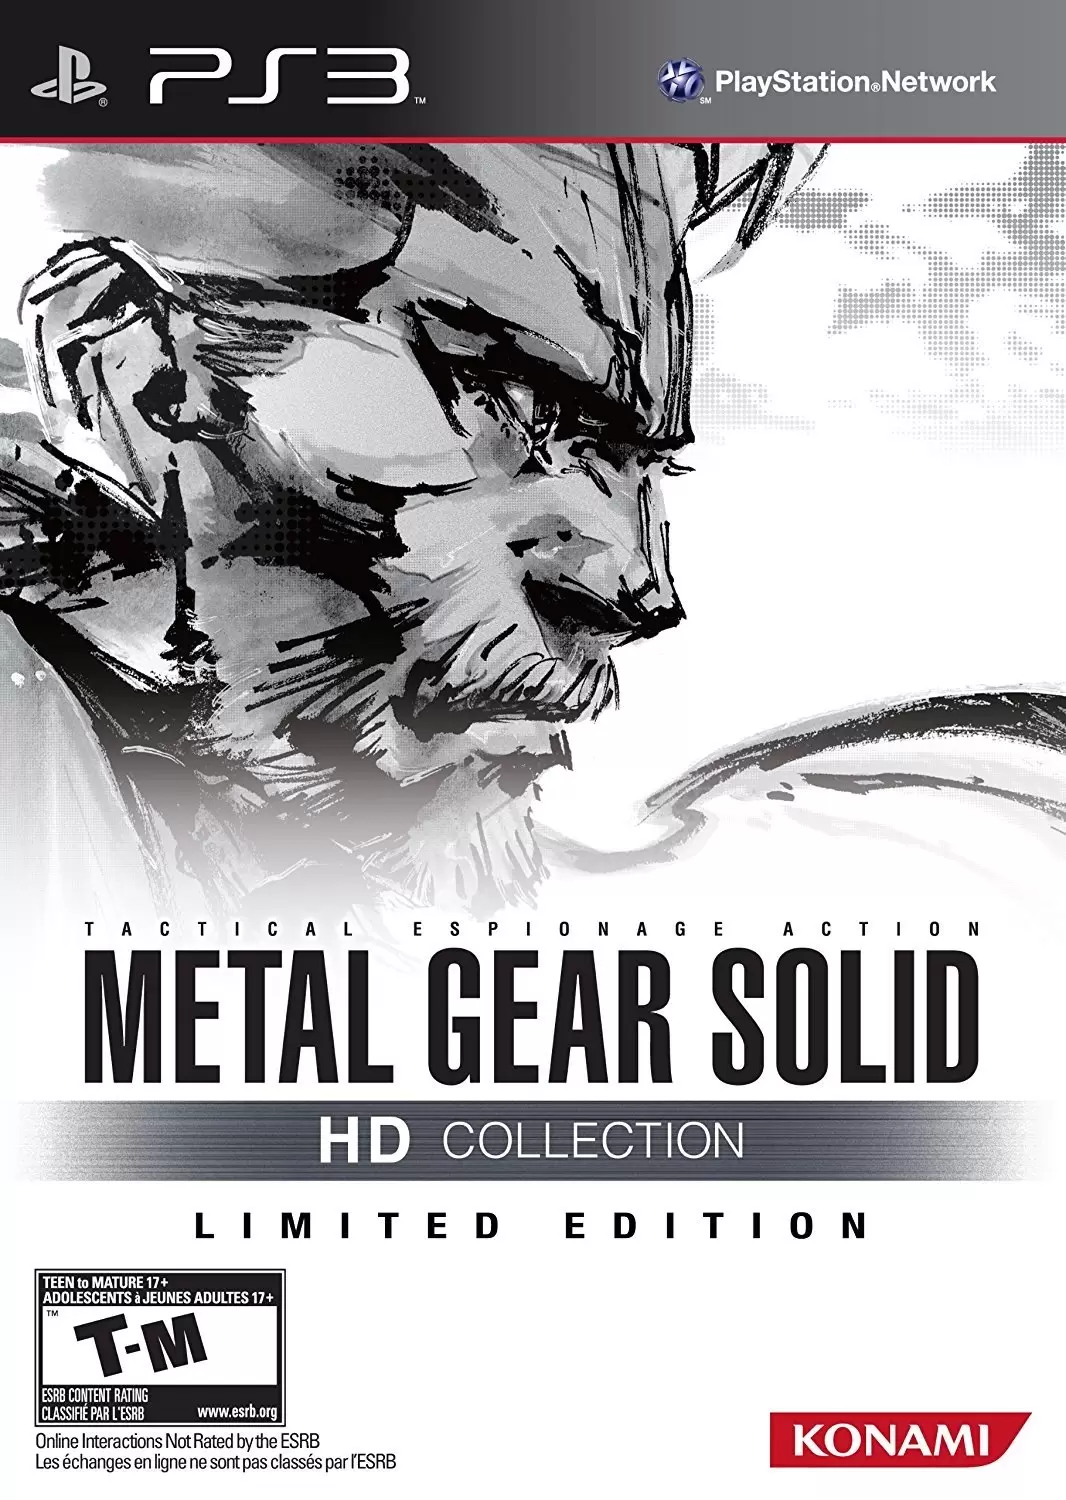 PS3 Games - Metal Gear Solid: HD Collection Limited Edition